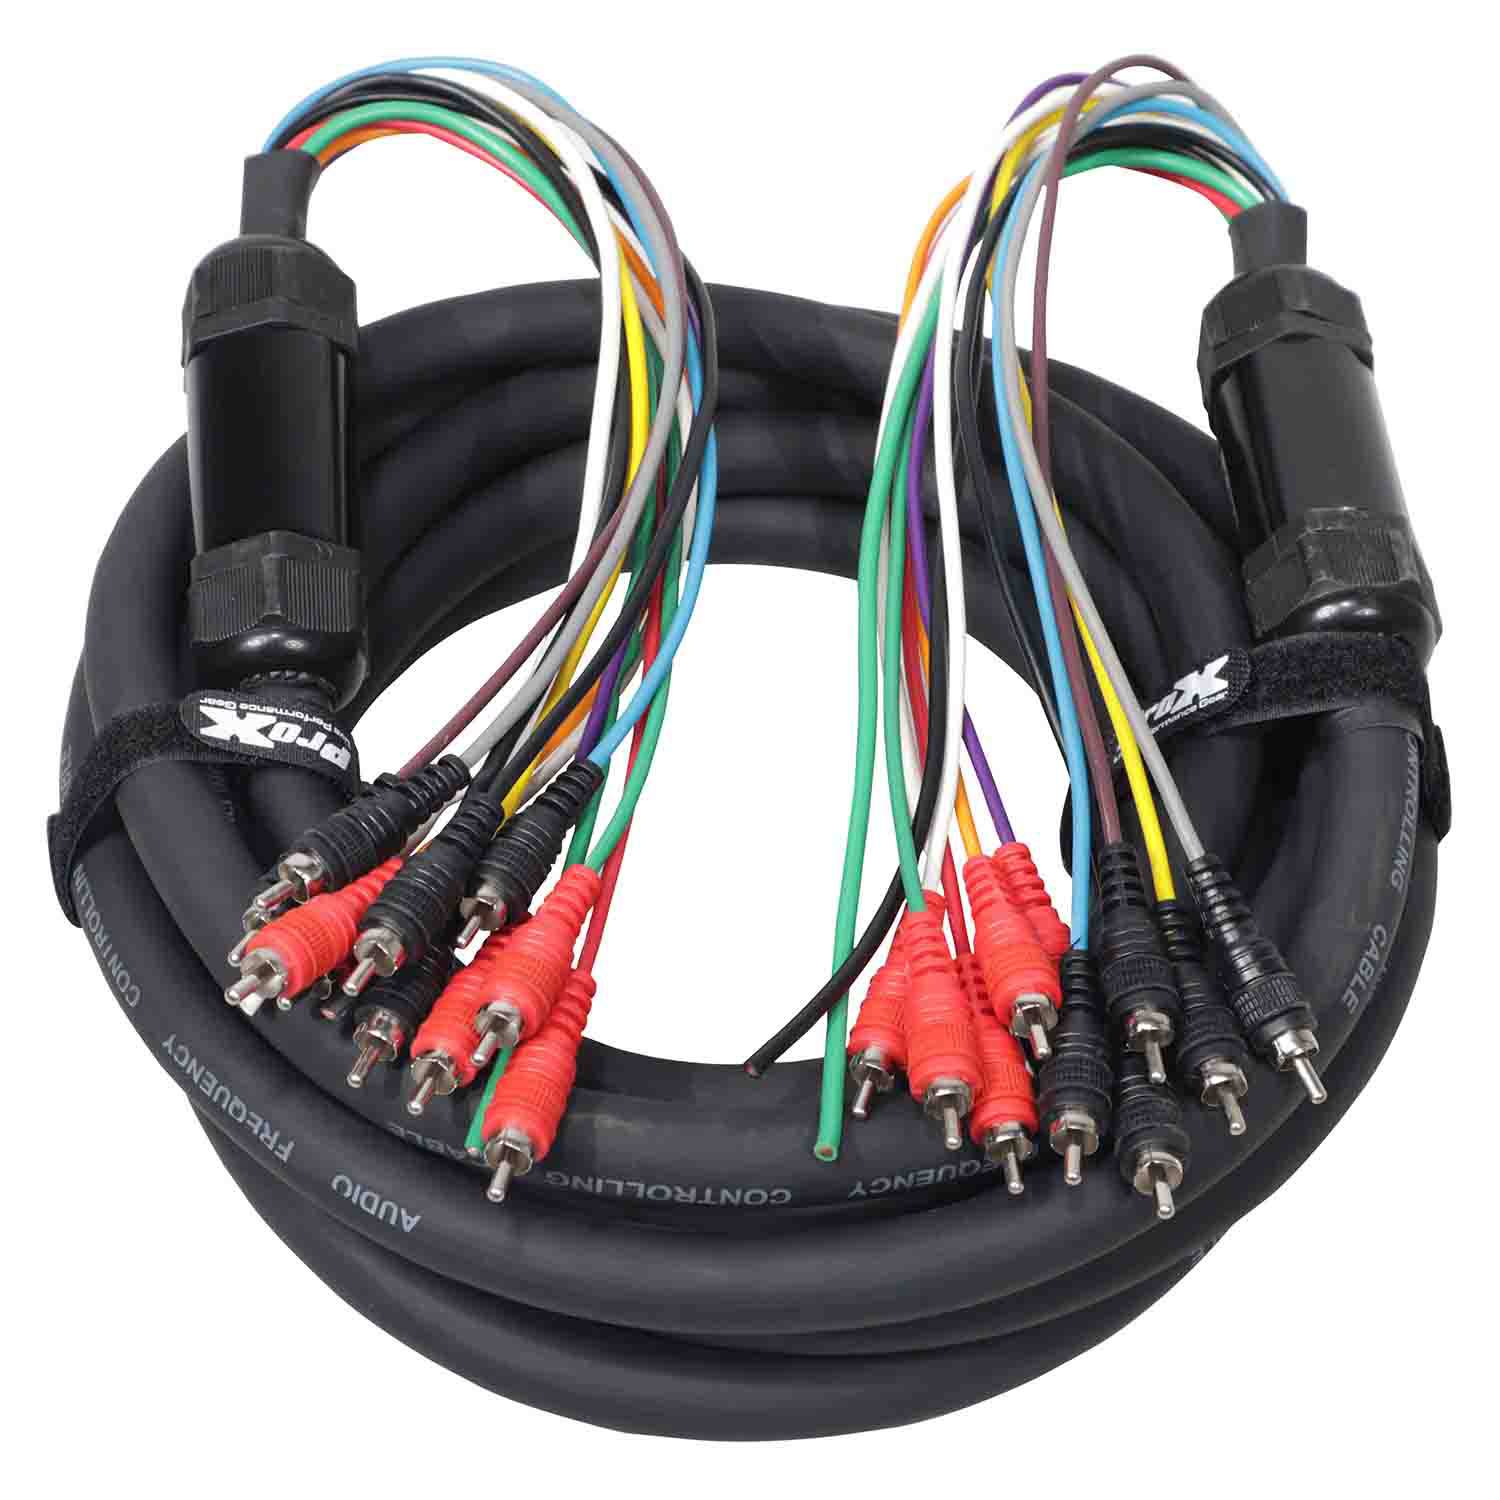 ProX XC-MEDOOZA25, 10 RCA Channel + 3 Power Cable for Marine and Car Audio - 25 Feet - Hollywood DJ